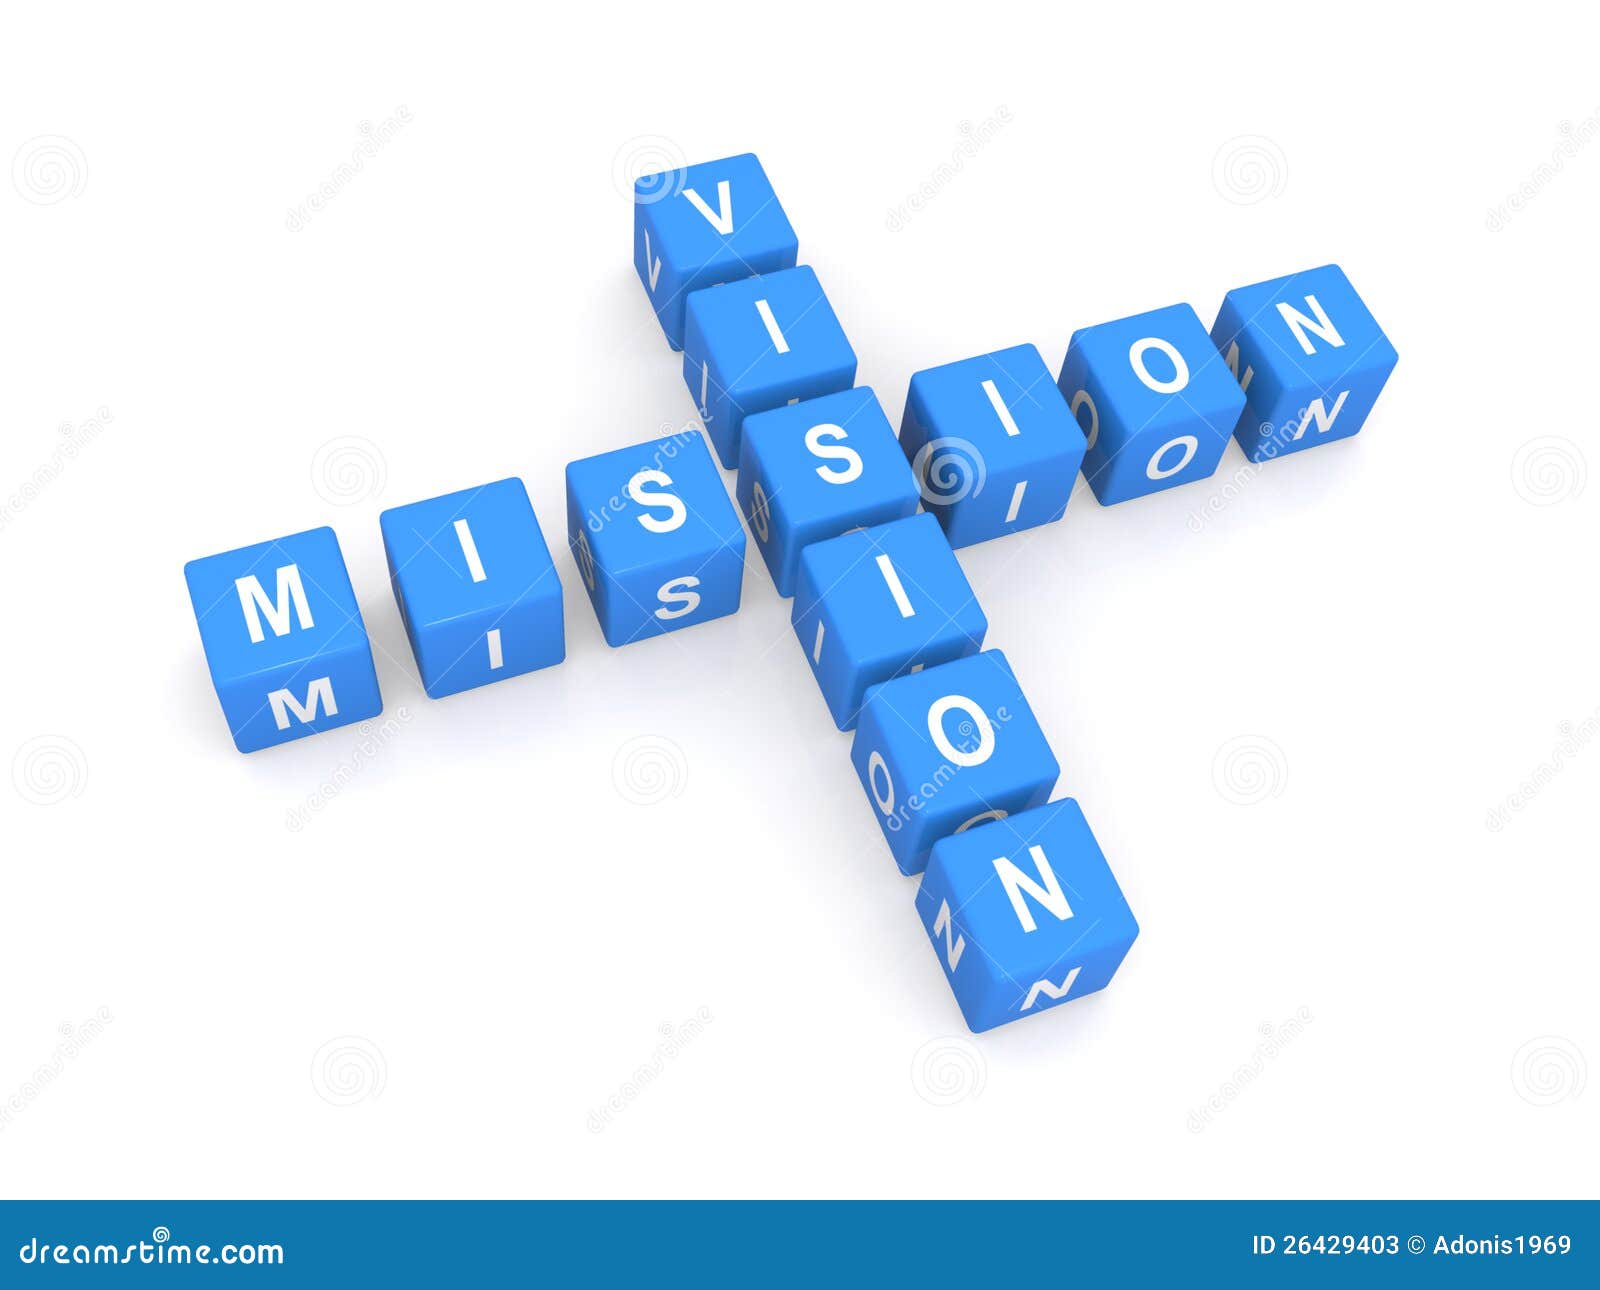 business vision clipart - photo #34